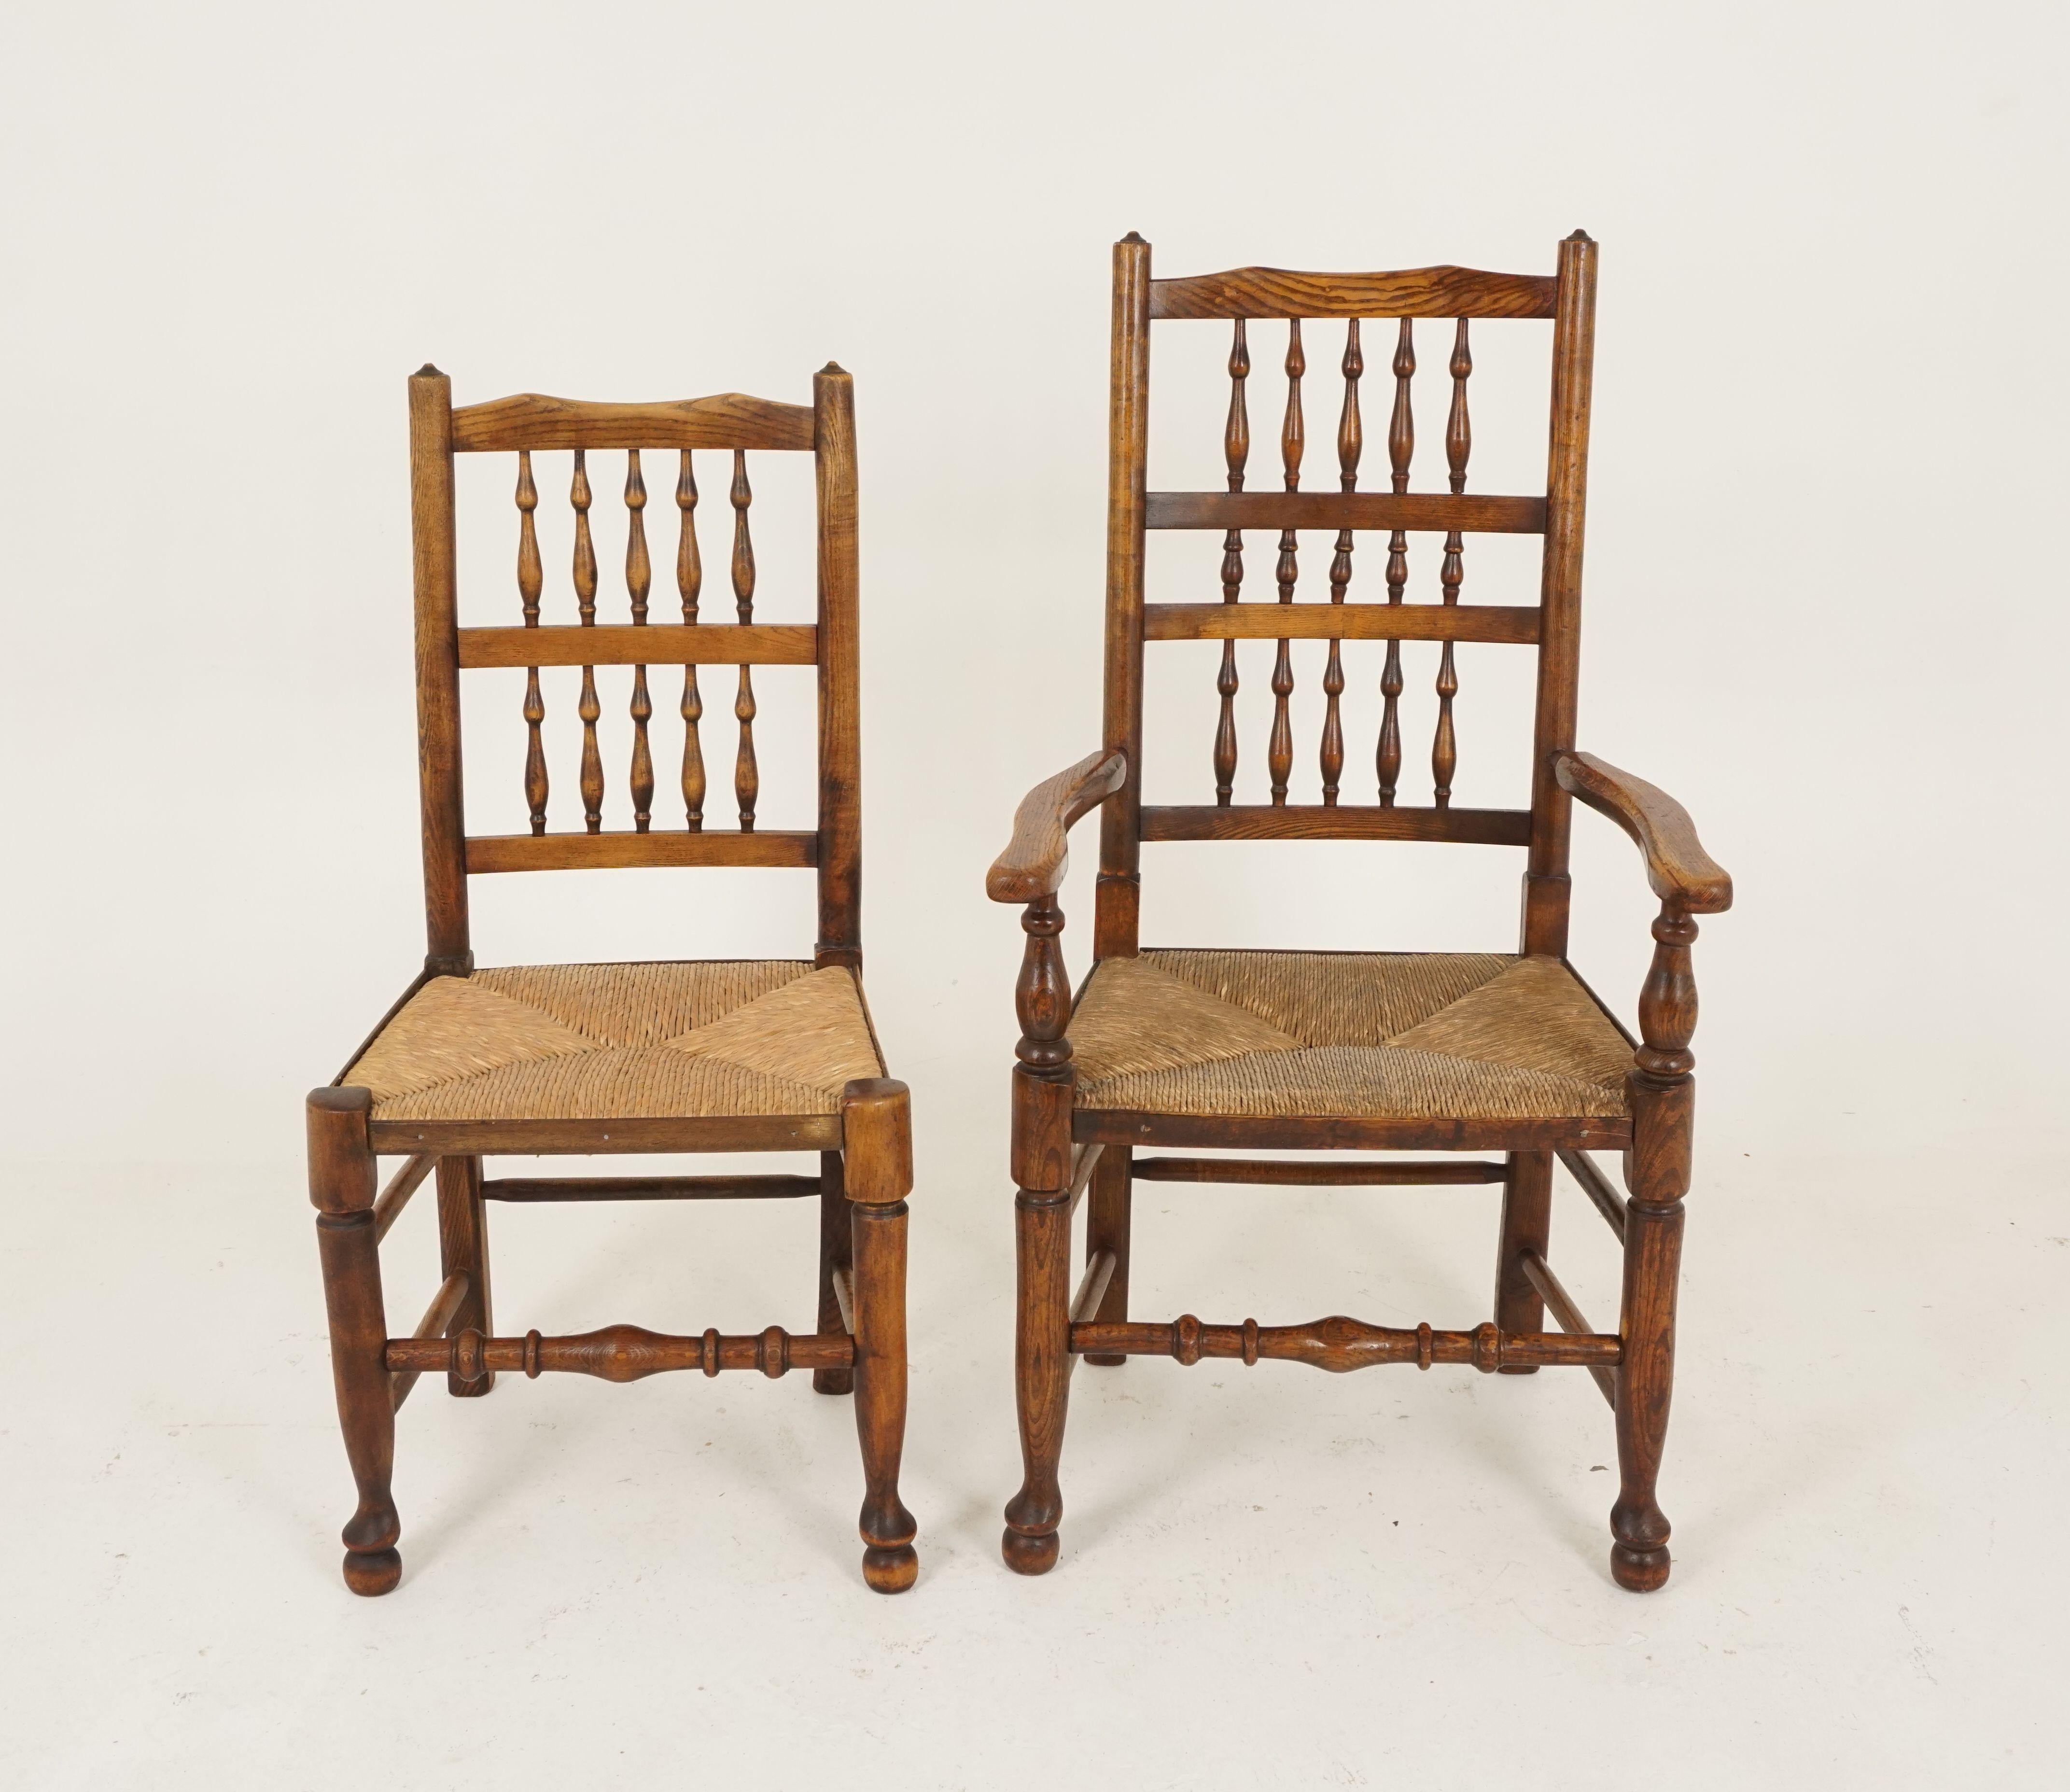 6 antique rush seated chairs, country Lancashire farmhouse, spindle back chairs, England 1910, B2219

Lancashire, England, 1910
Solid ash + elmwood
Original finish
Shaped top rail
Two-tier spindle back design on single chair and three-tier